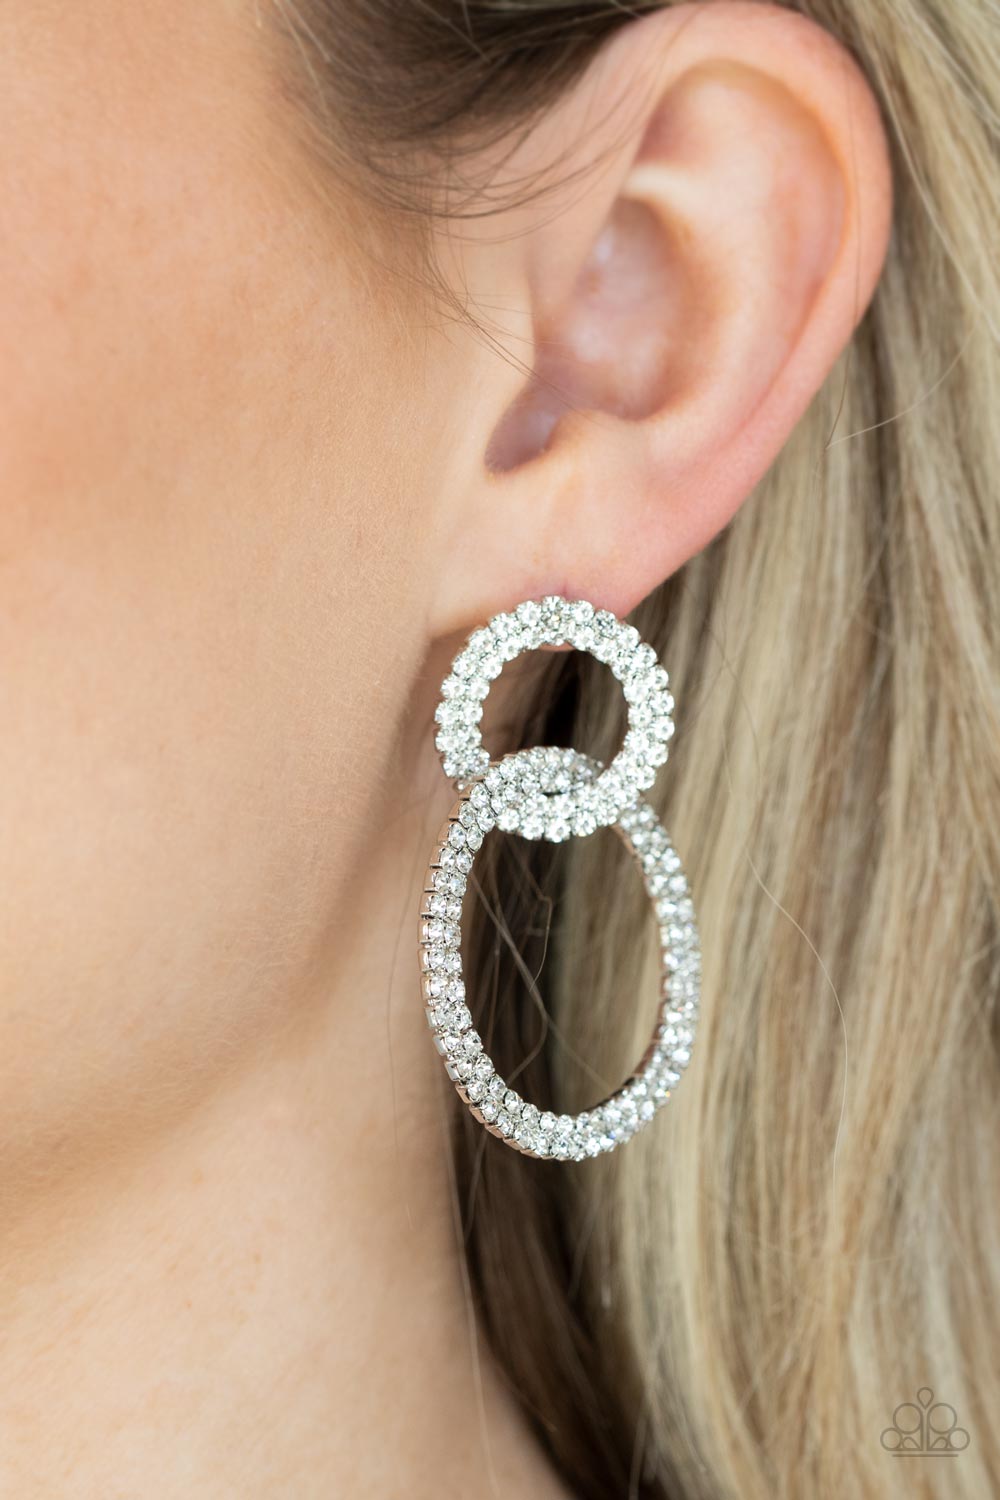 Intensely Icy Earrings - White